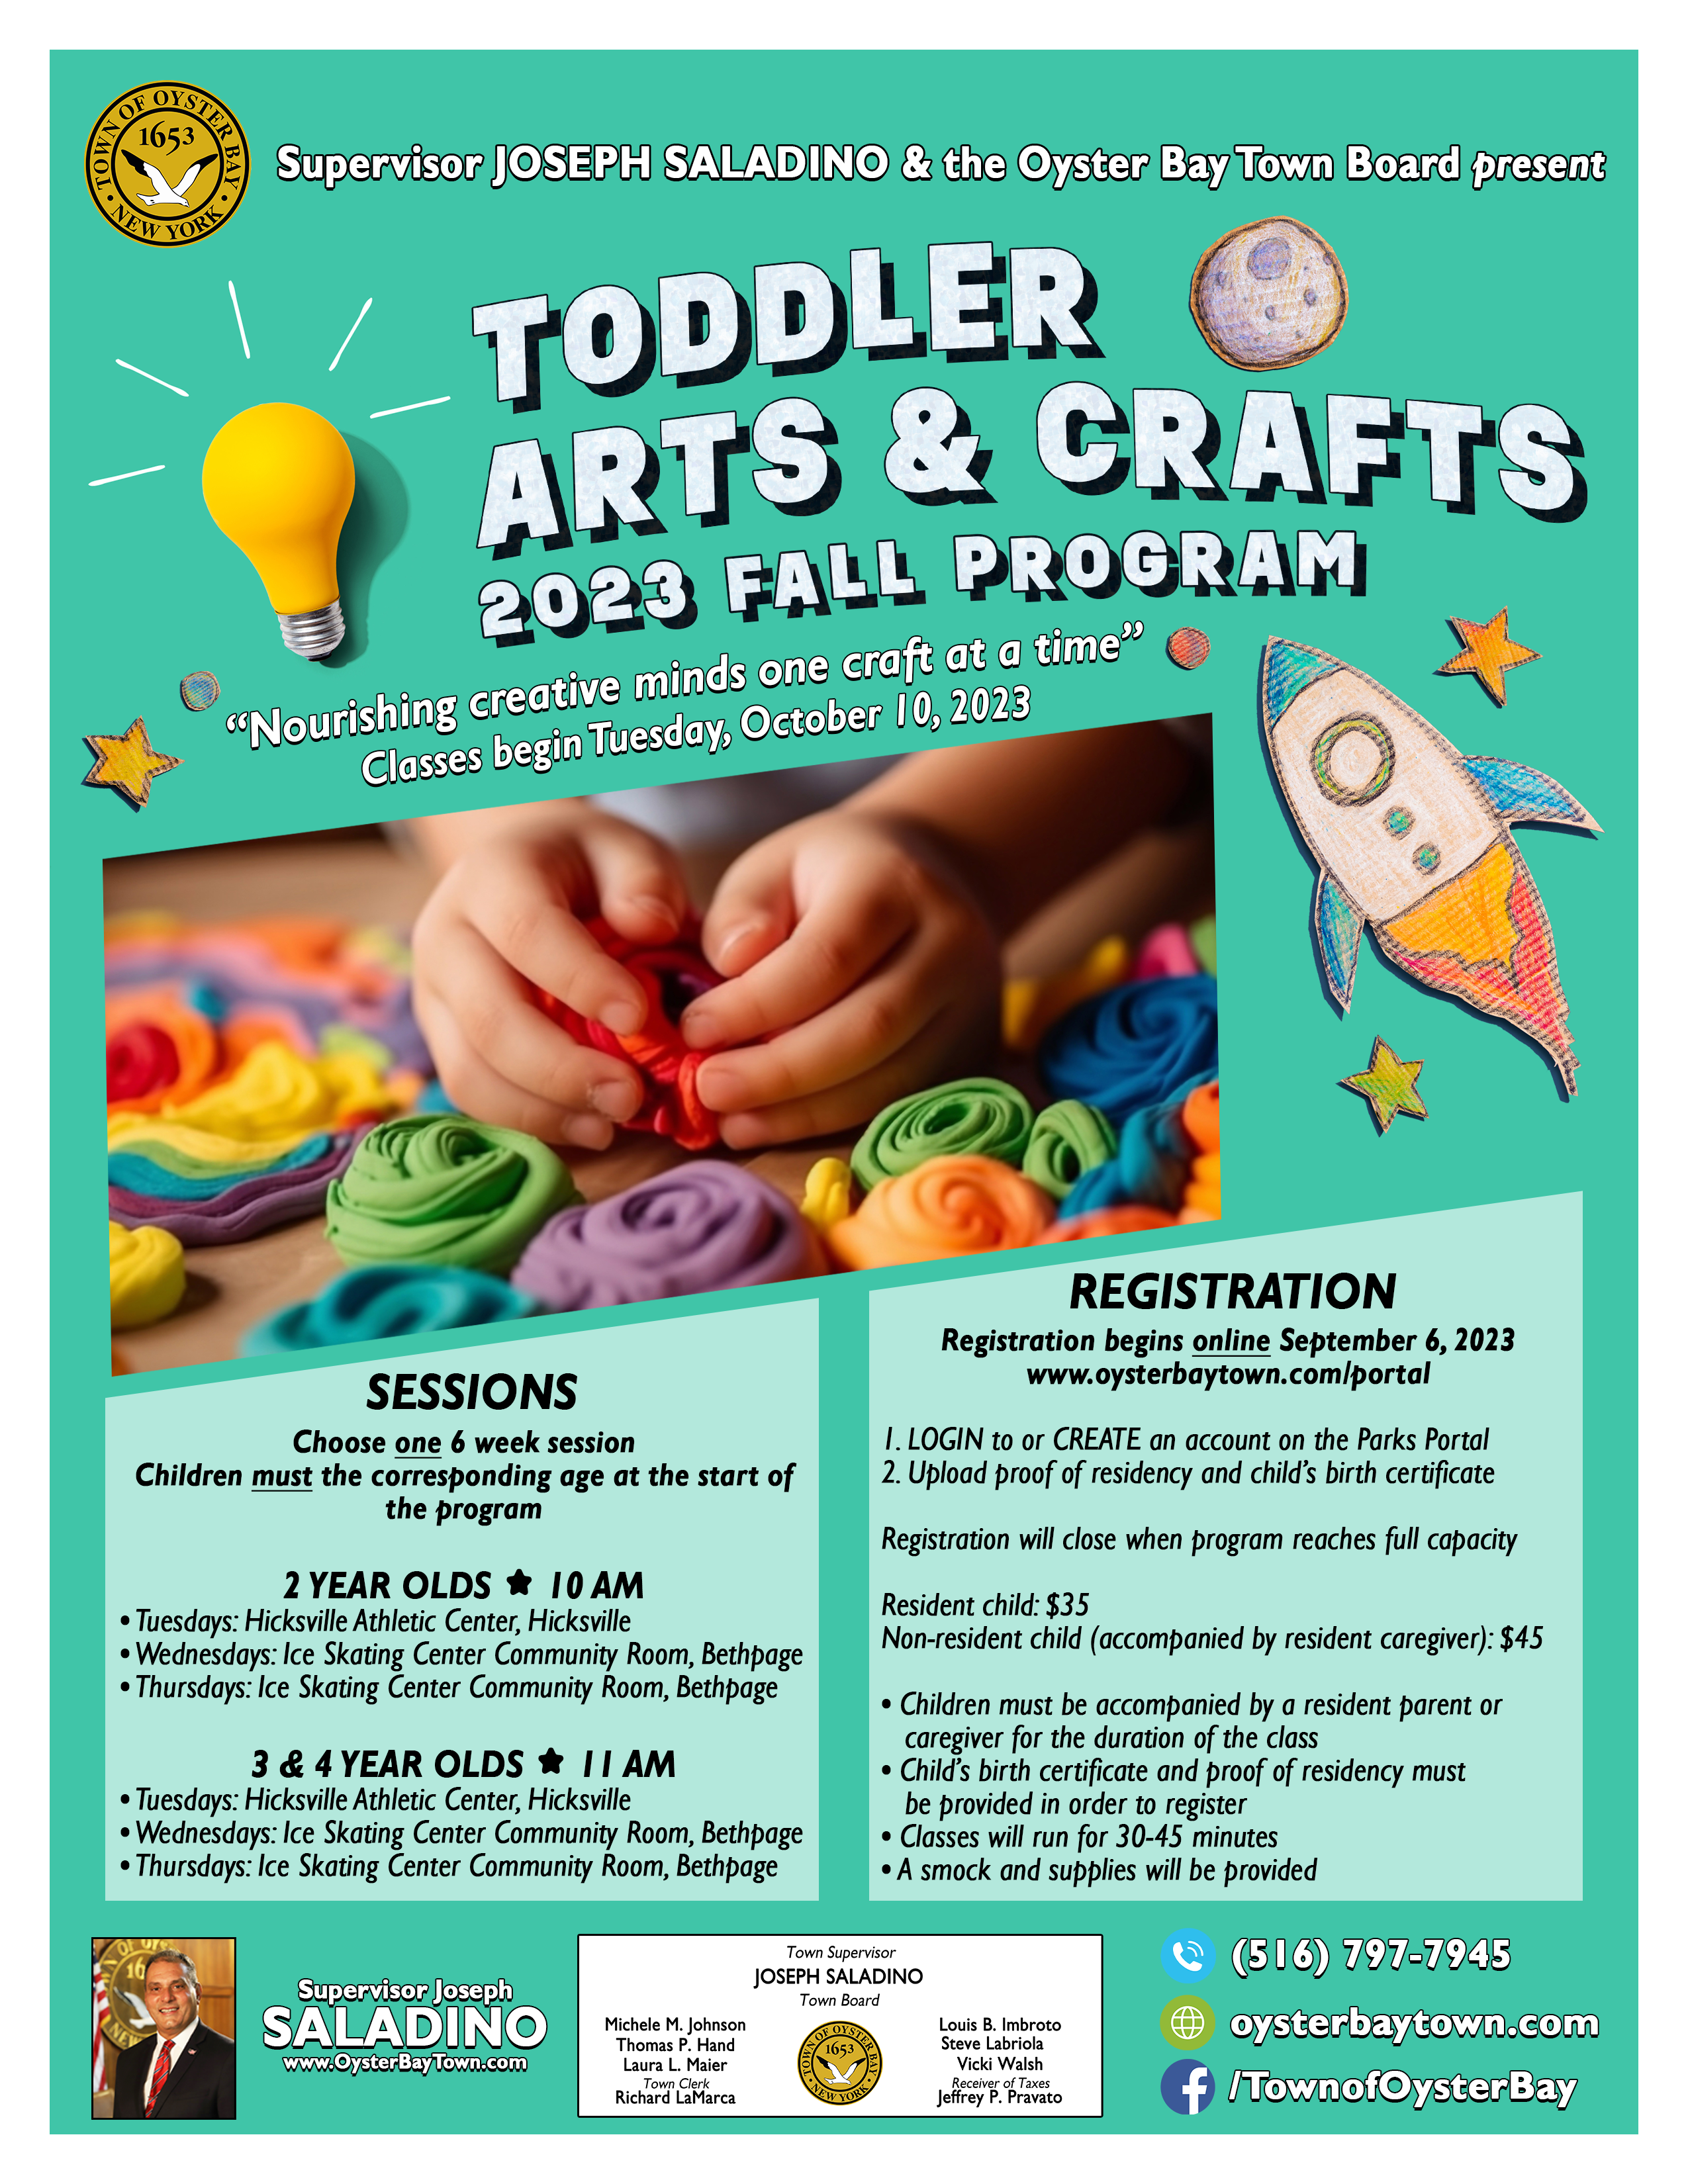 Walsh Announces Fall 2023 Toddler Arts & Crafts Program – Town of